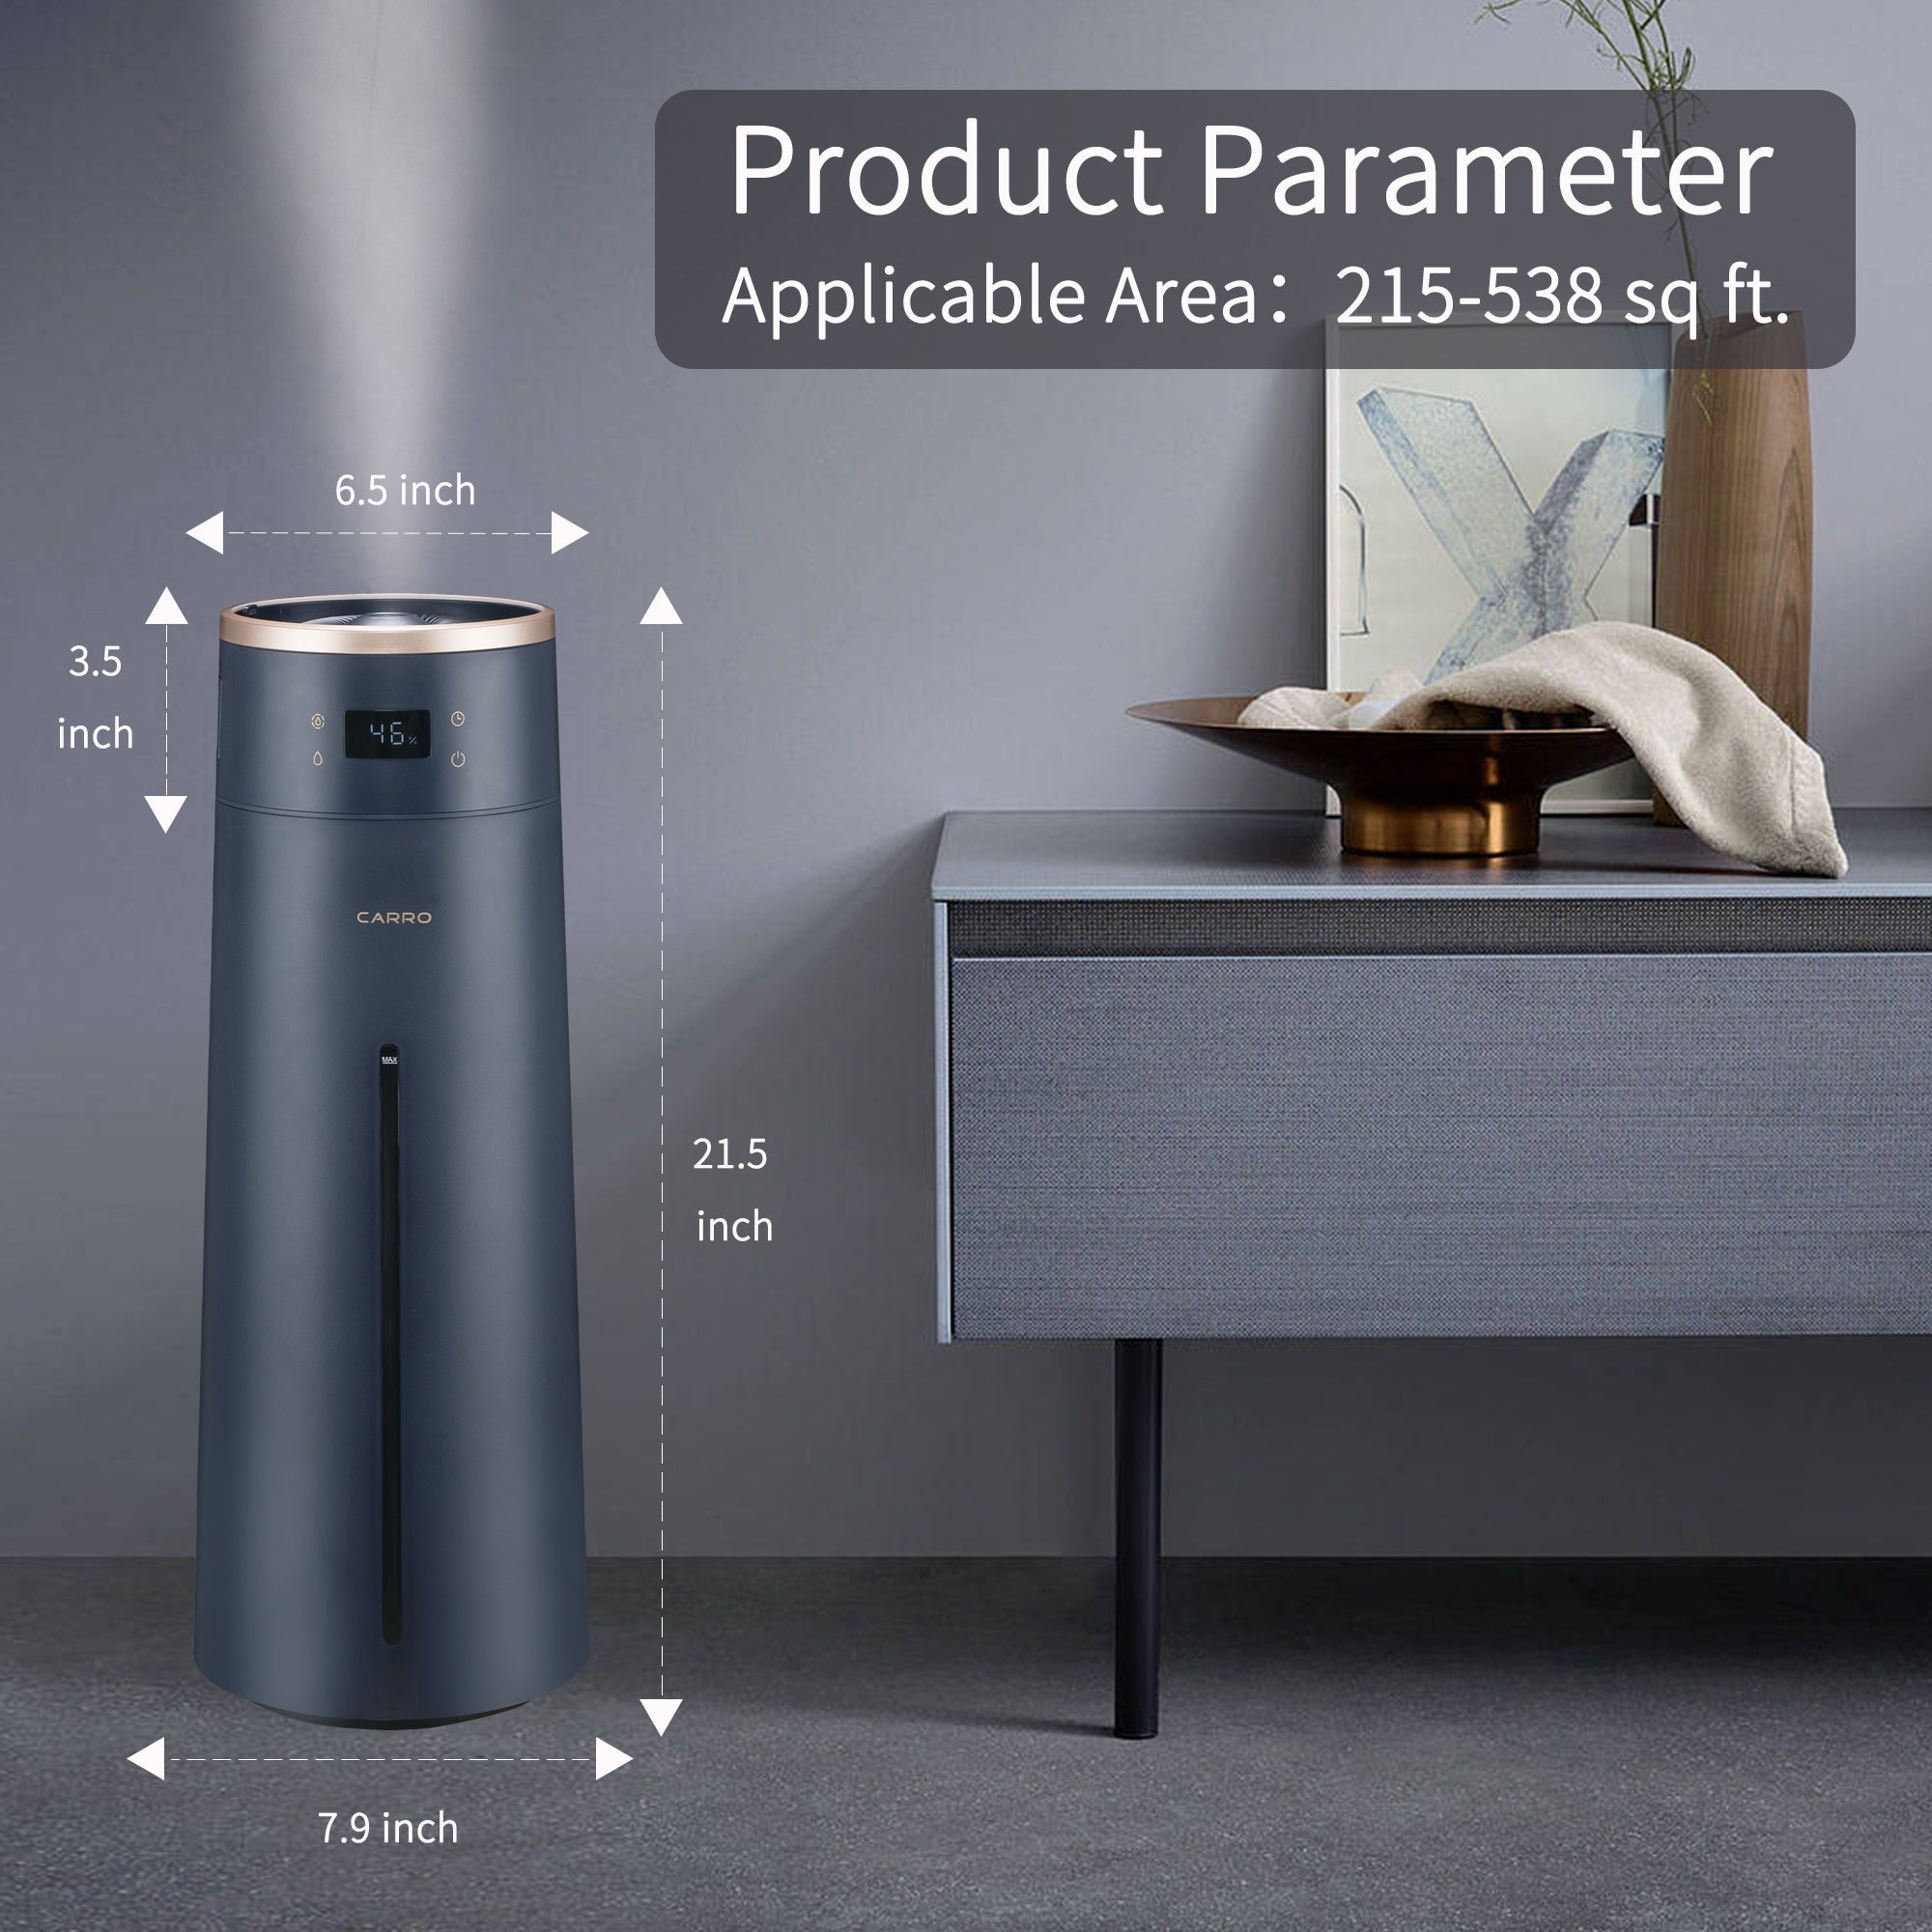 Blue humidifier product parameter 